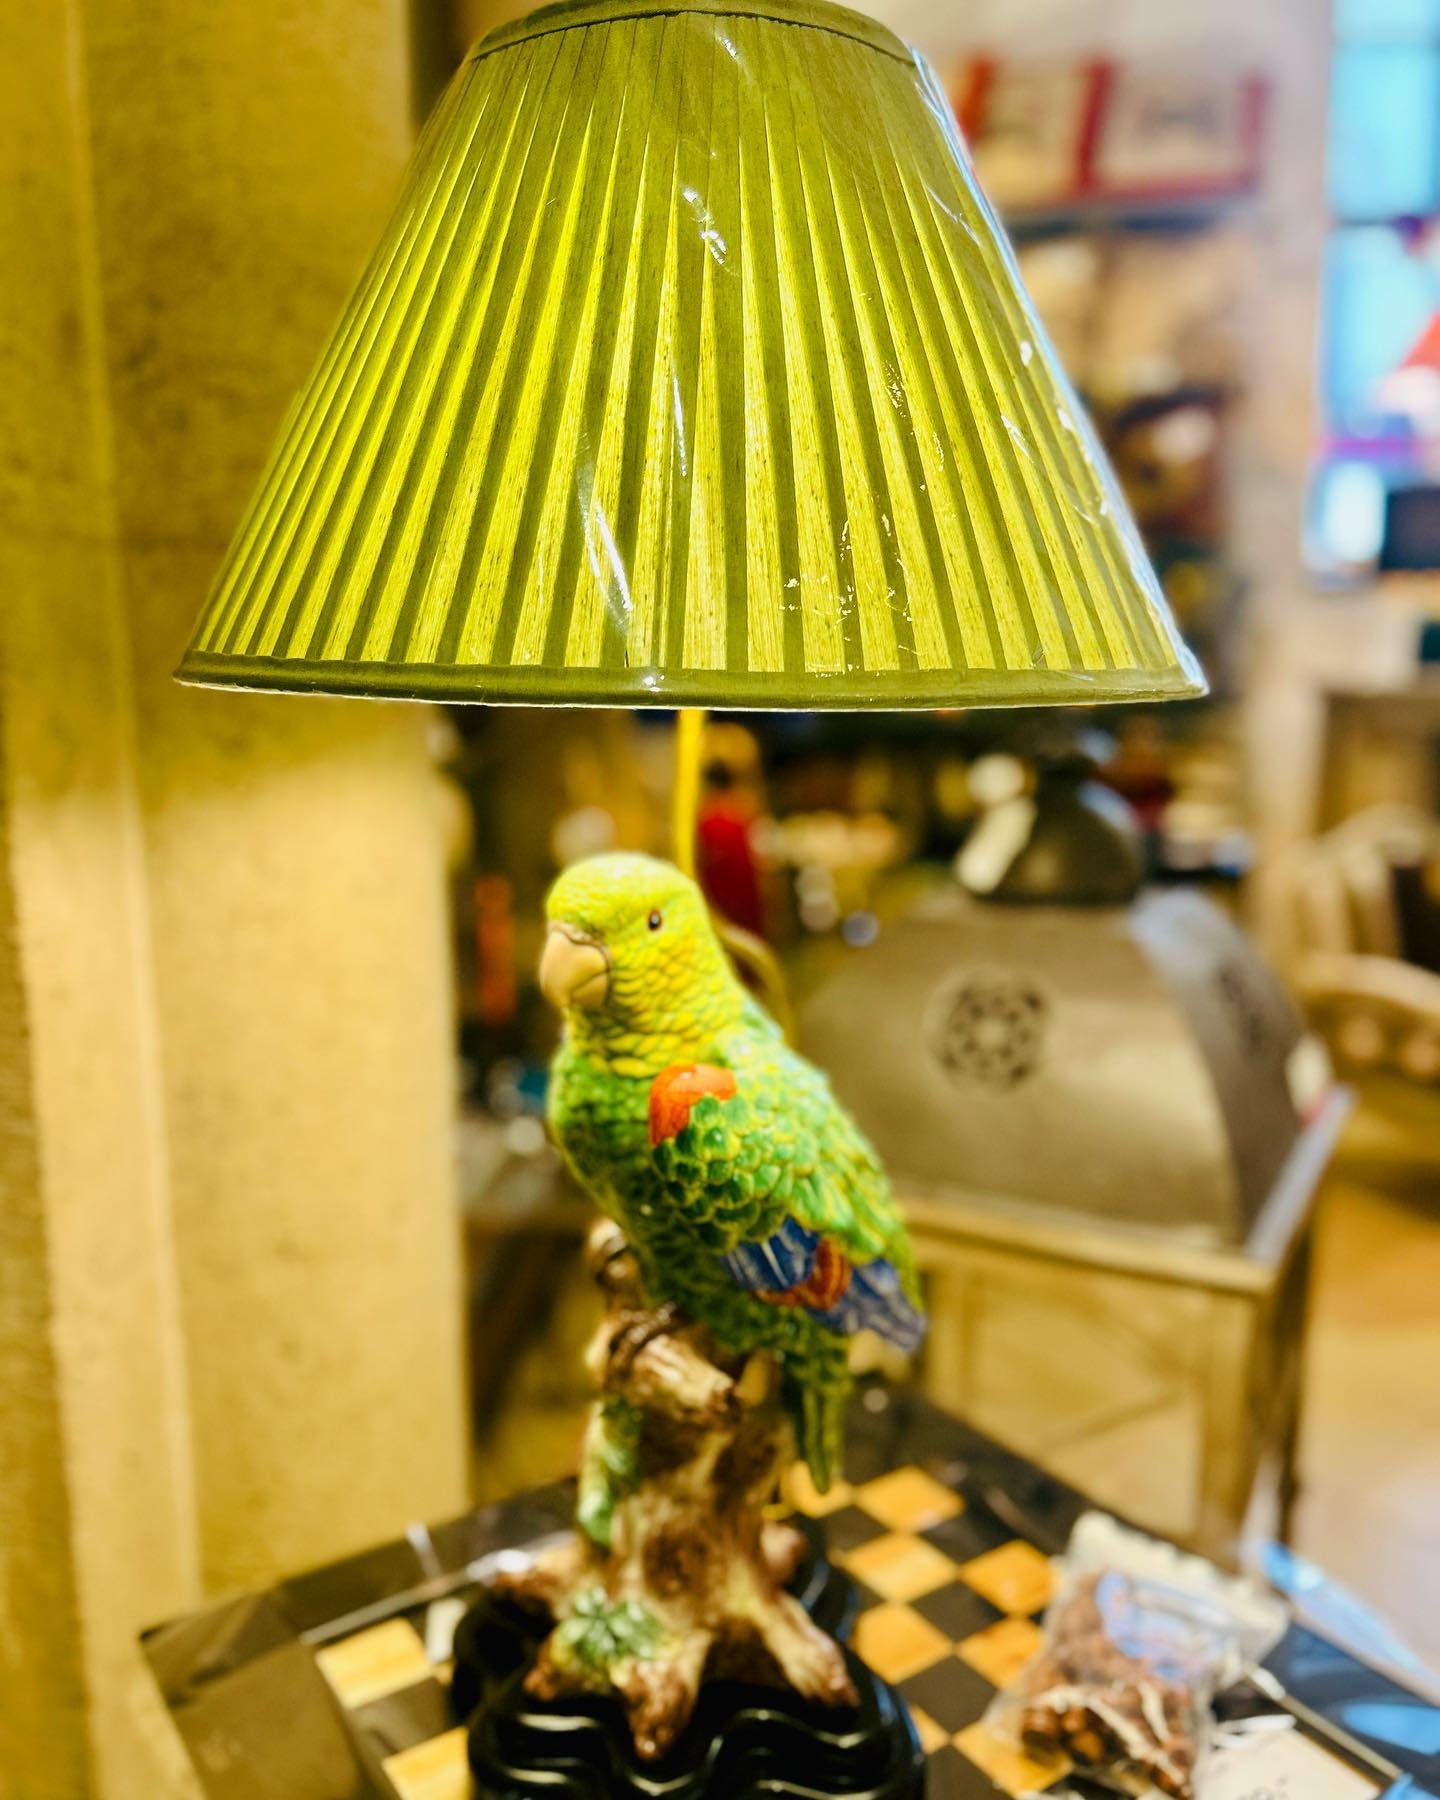 Illuminate your space with our extraordinary lamps! From majestic parrots to elegant rhinos - at Palais Interiors, we offer unique lighting that will make your interior shine. Let your decor dreams take flight! ✨ #PalaisInteriors #UniqueLighting #Dec